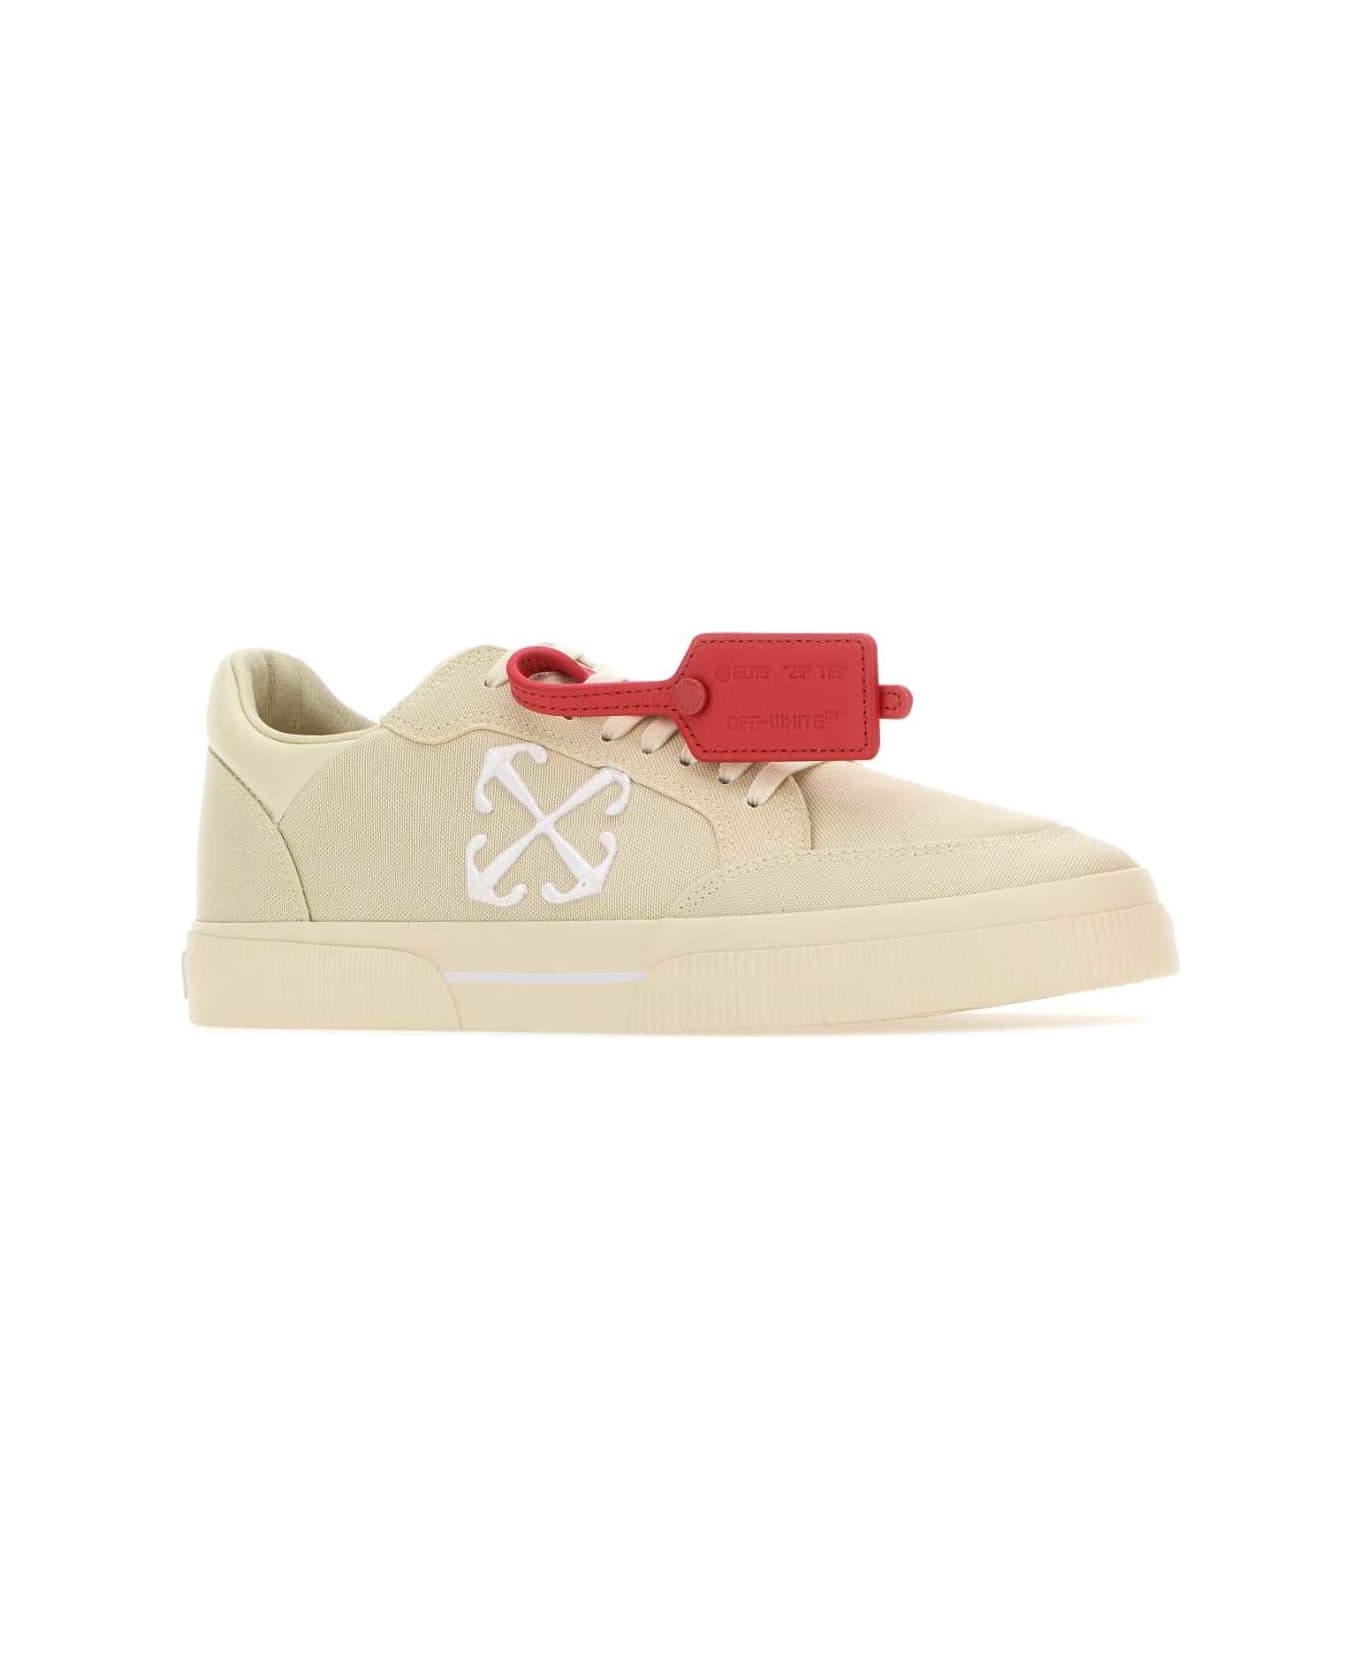 Off-White New Low Vulcanized Sneakers - 0301 スニーカー